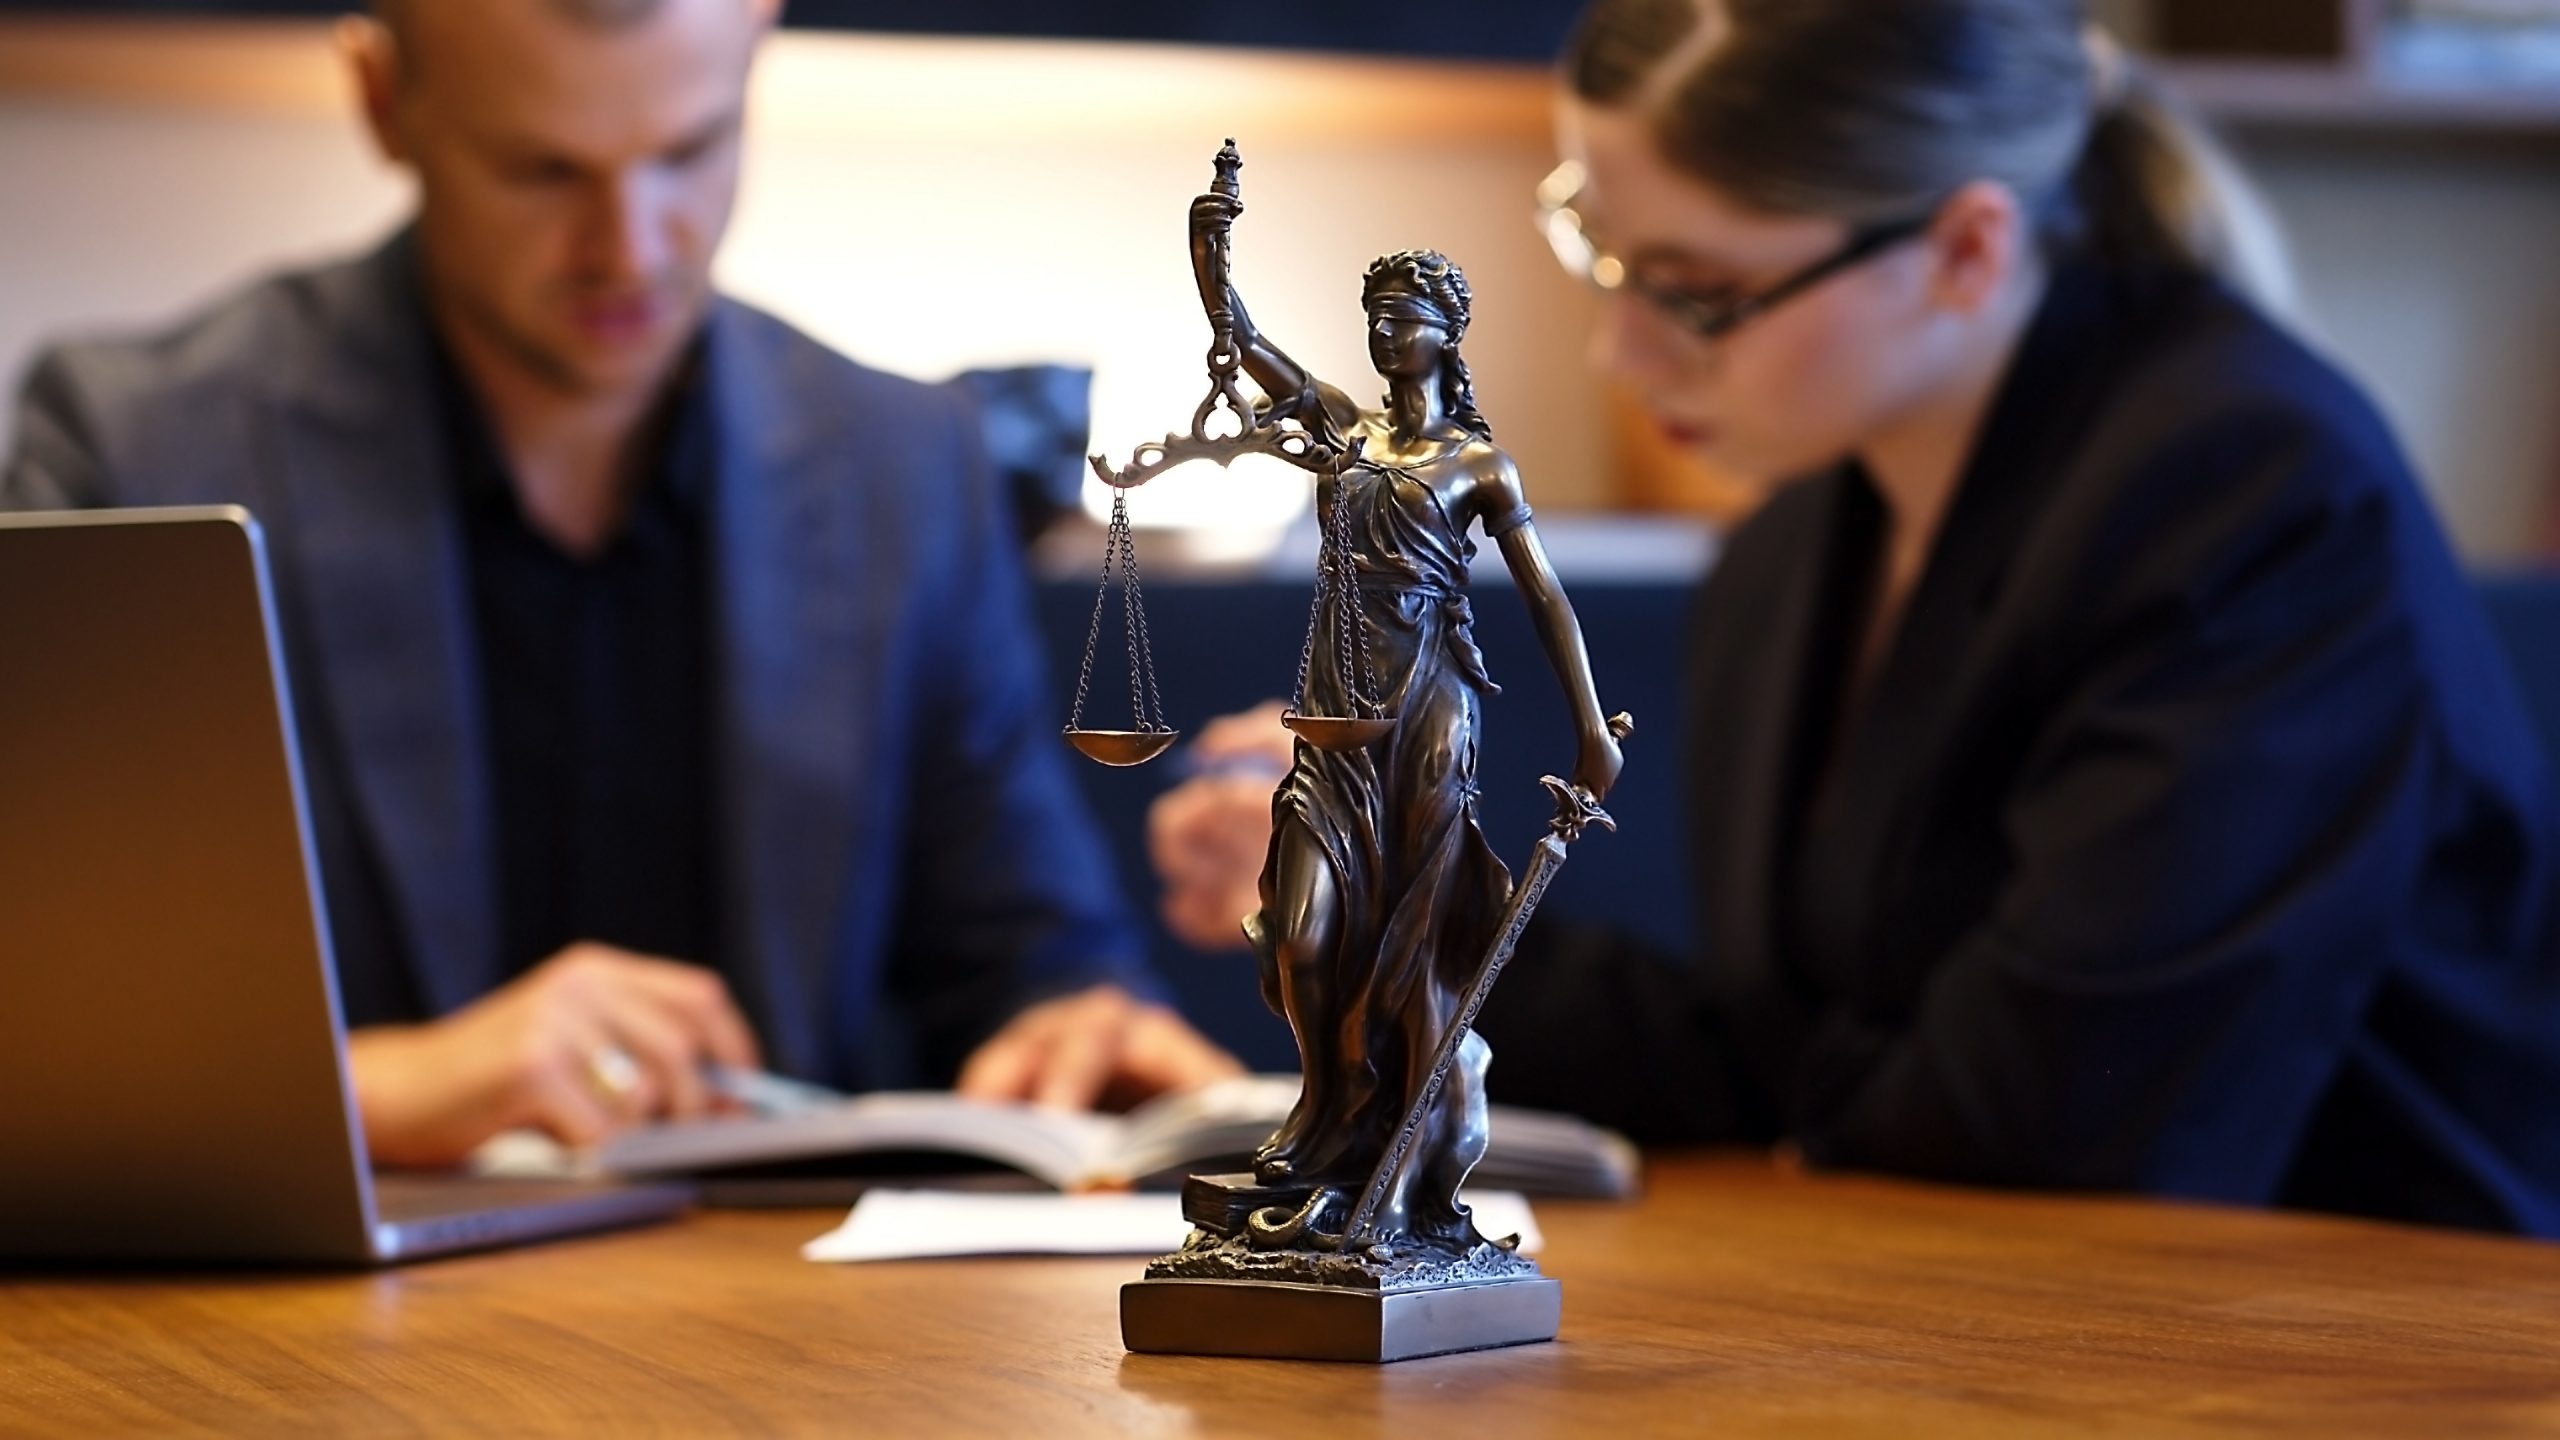 A bronze statue of Lady Justice is prominently displayed on a wooden table. In the background, a man and a woman, both dressed in professional attire, are engaged in a discussion over open books. The room, designed as a primer for the legal system to laypersons, is warmly lit.